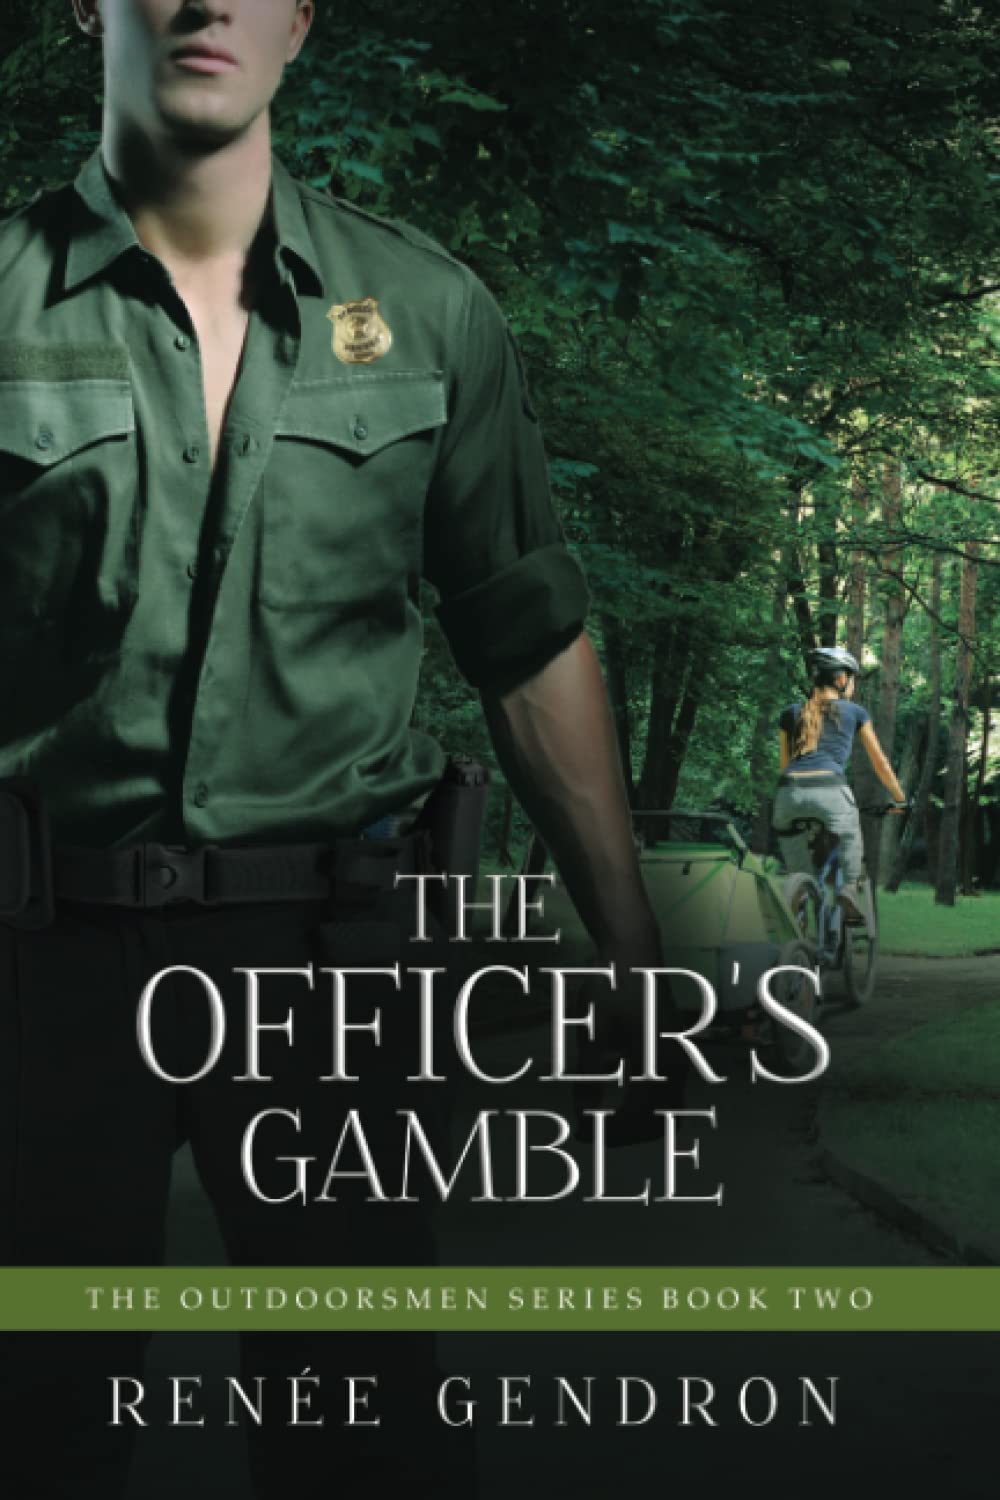 Conversation officer standing in front of a woman on a bicycle; The Officer's Gamble by Renée Gendron, released October 5, 2022